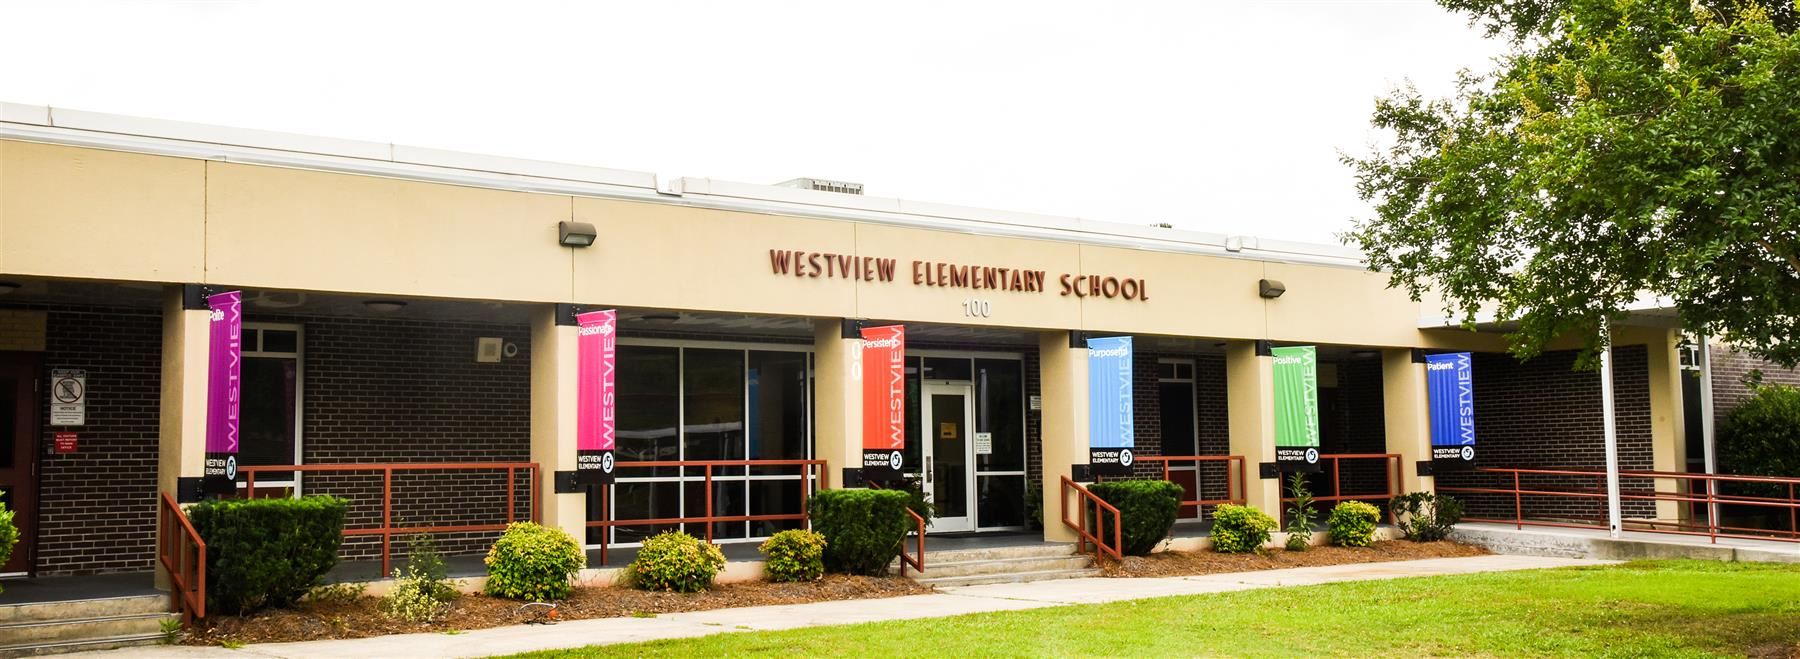 Westview Elementary from the outside